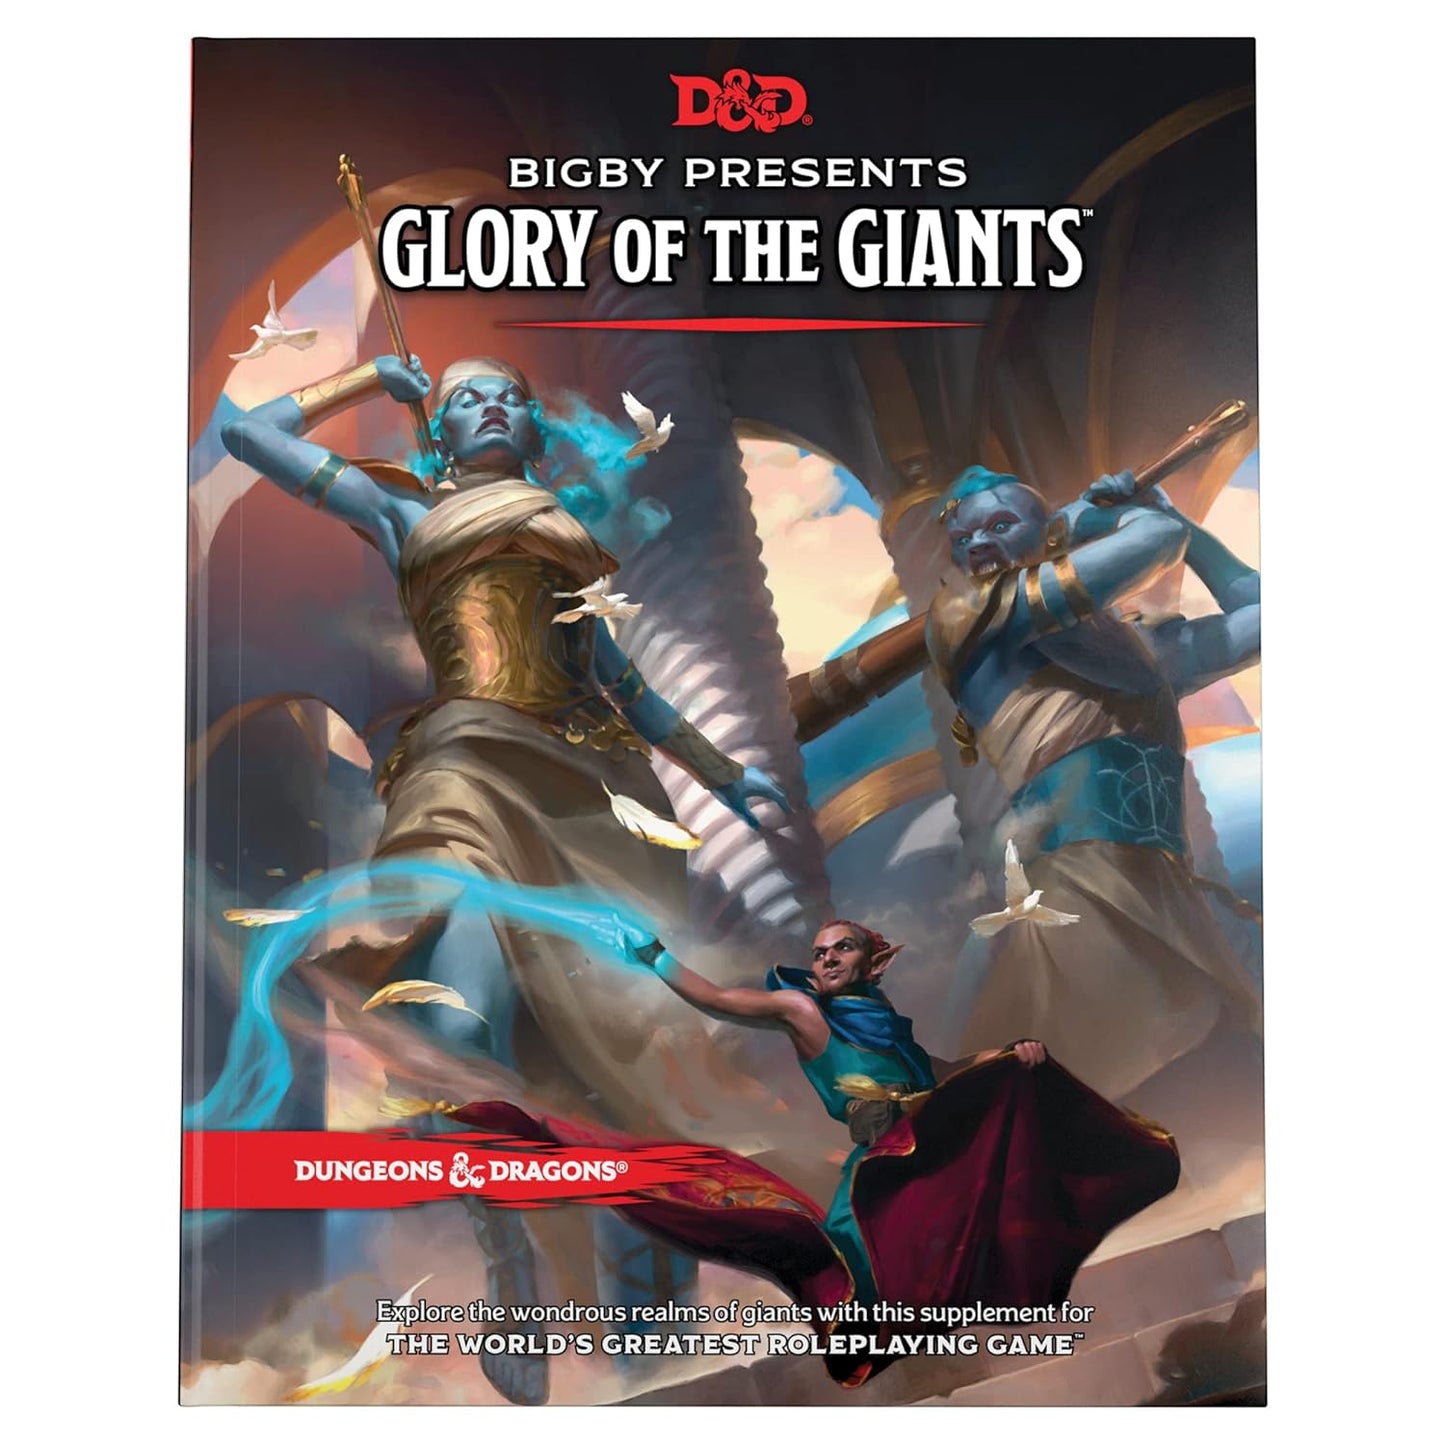 Dungeons & Dragons 5e: Bigby Presents: Glory of Giants